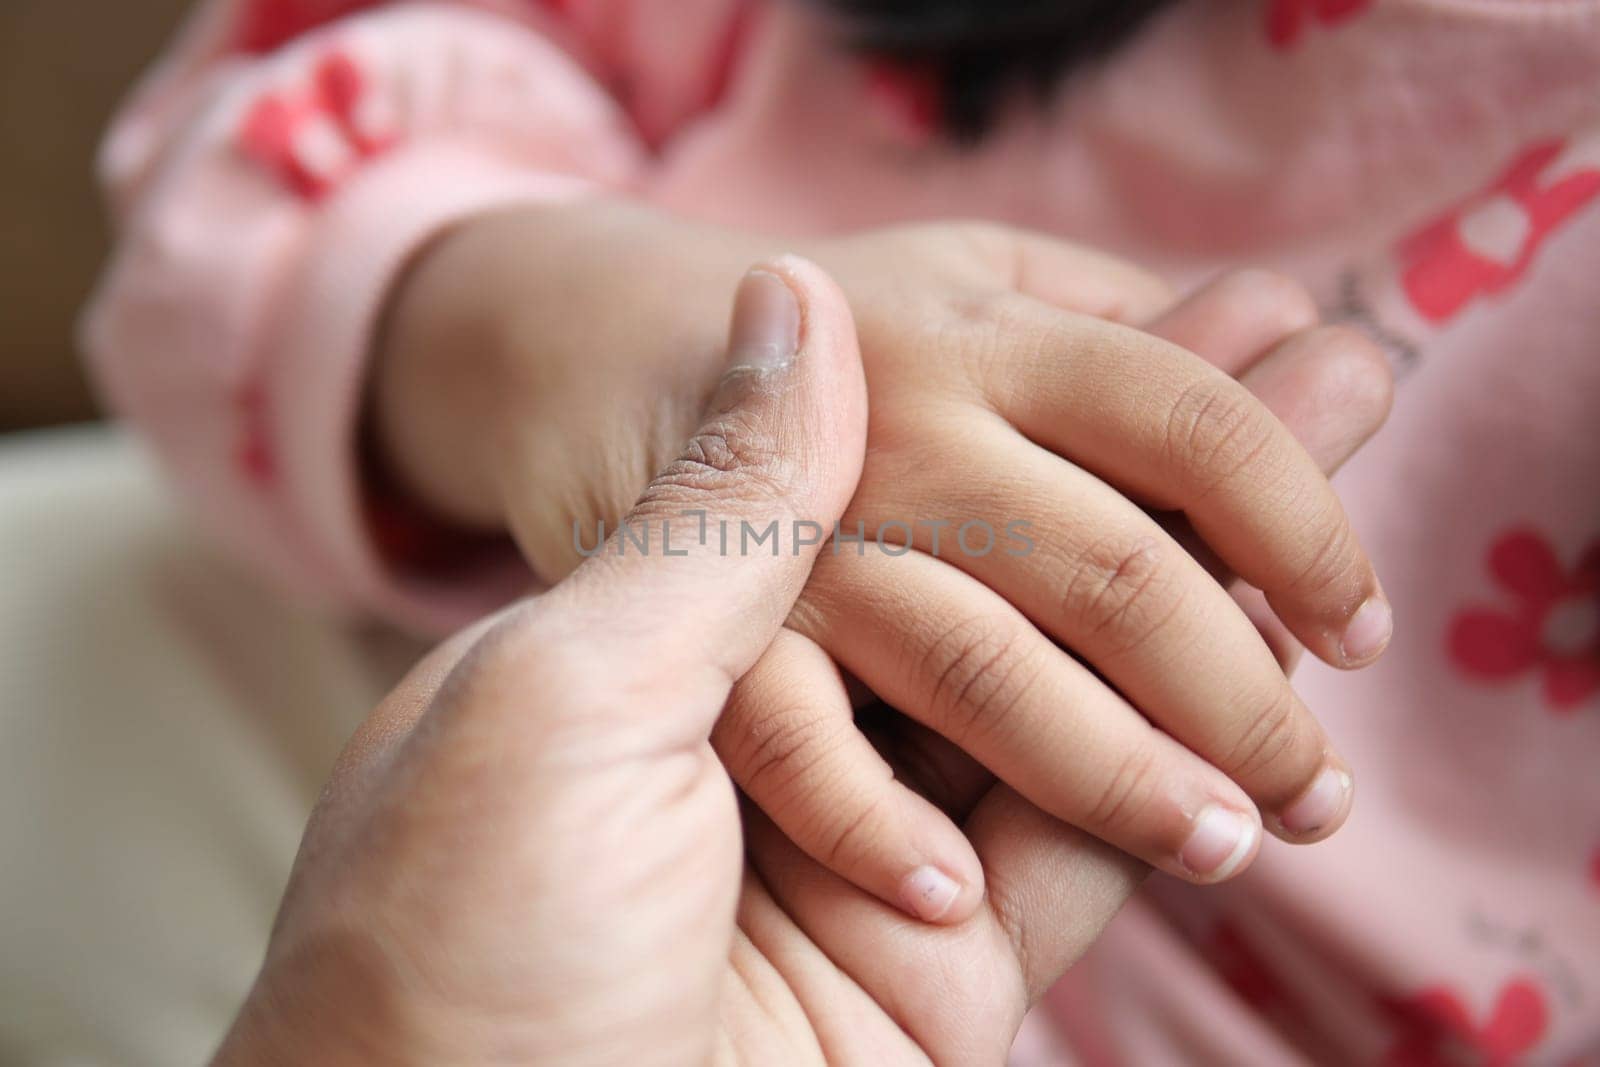 father holding hand of baby child, close up